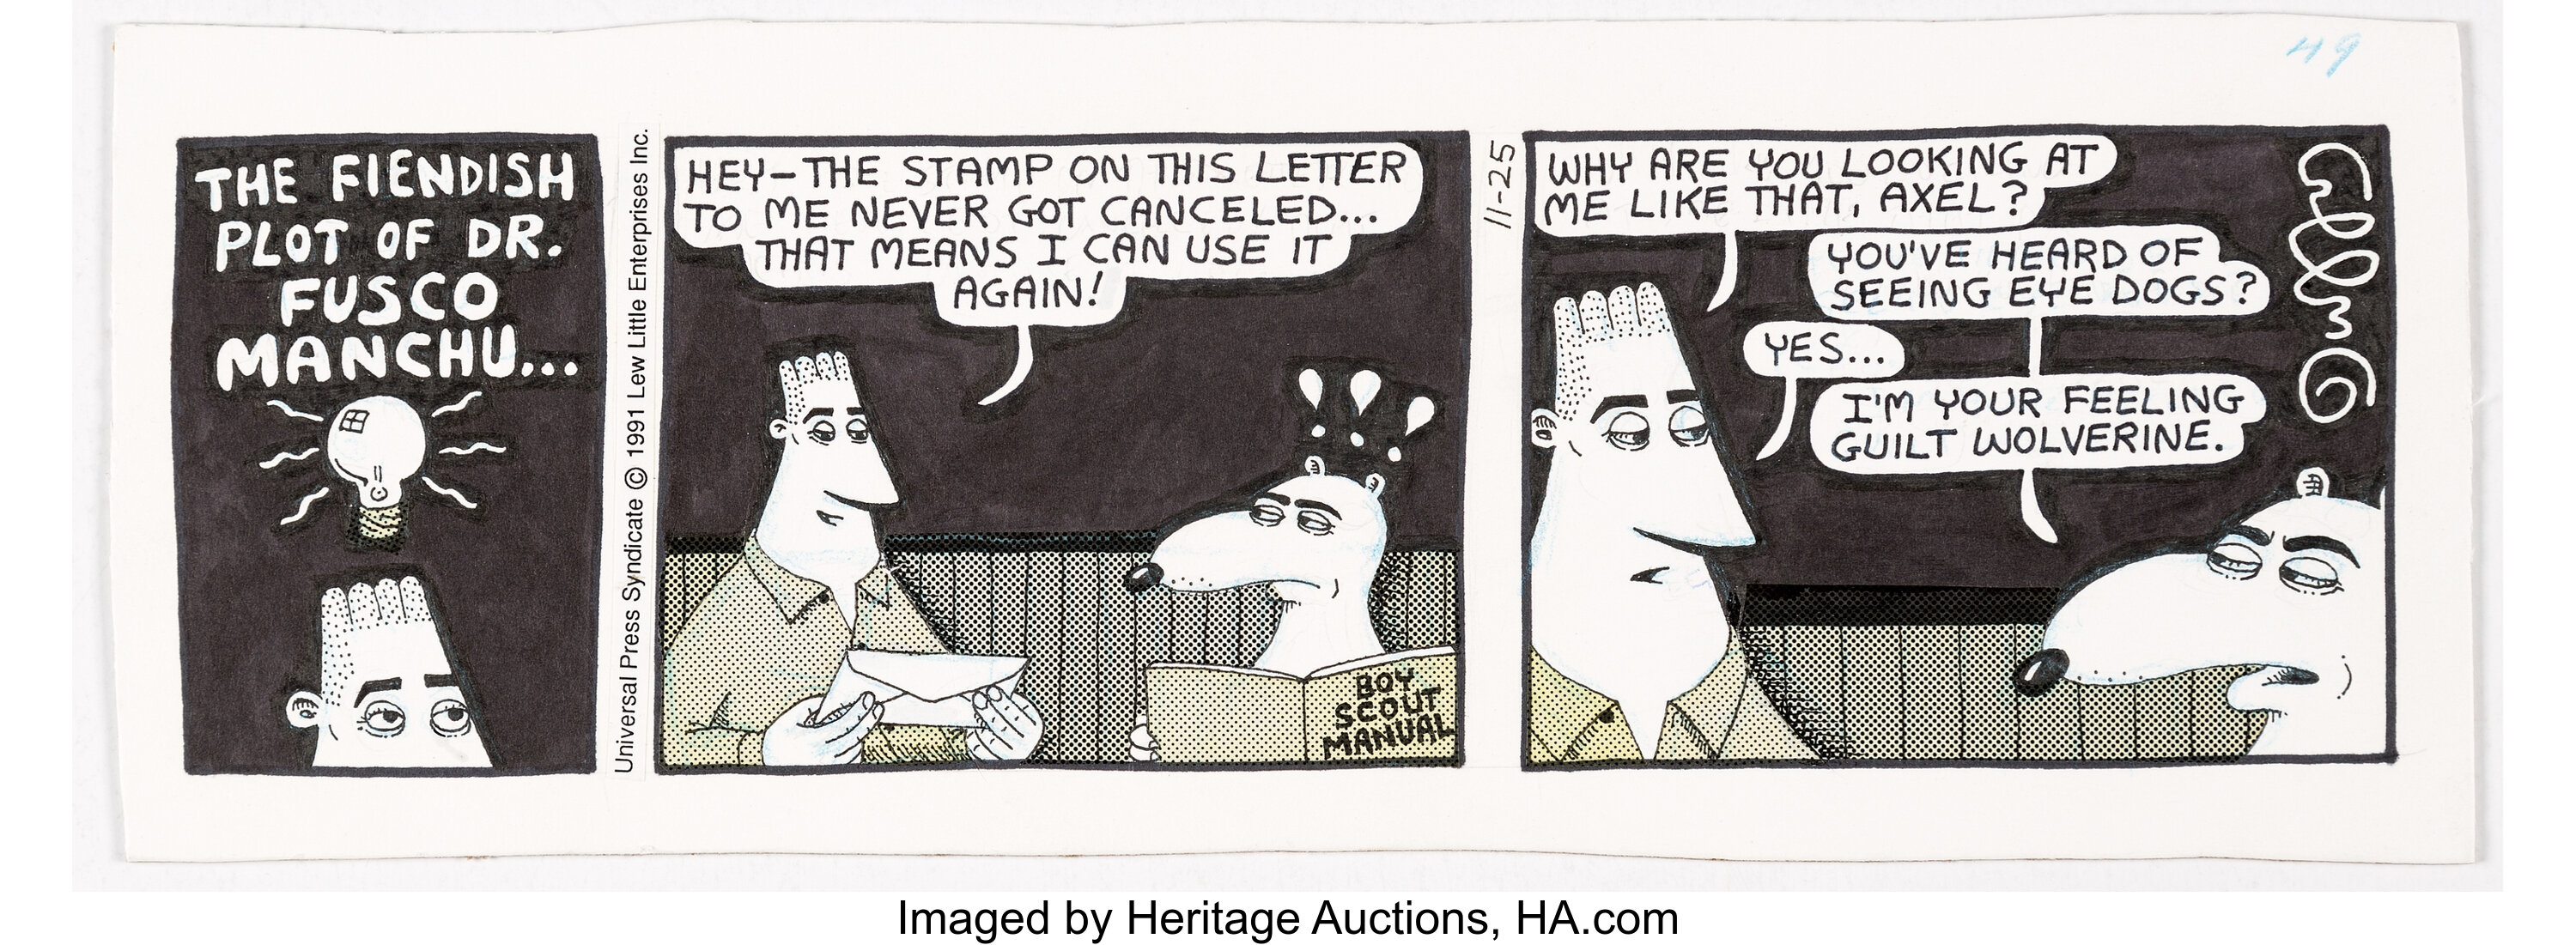 J.C. Duffy The Brothers Comic Strip and Additional Works by | Lot #15044 | Heritage Auctions